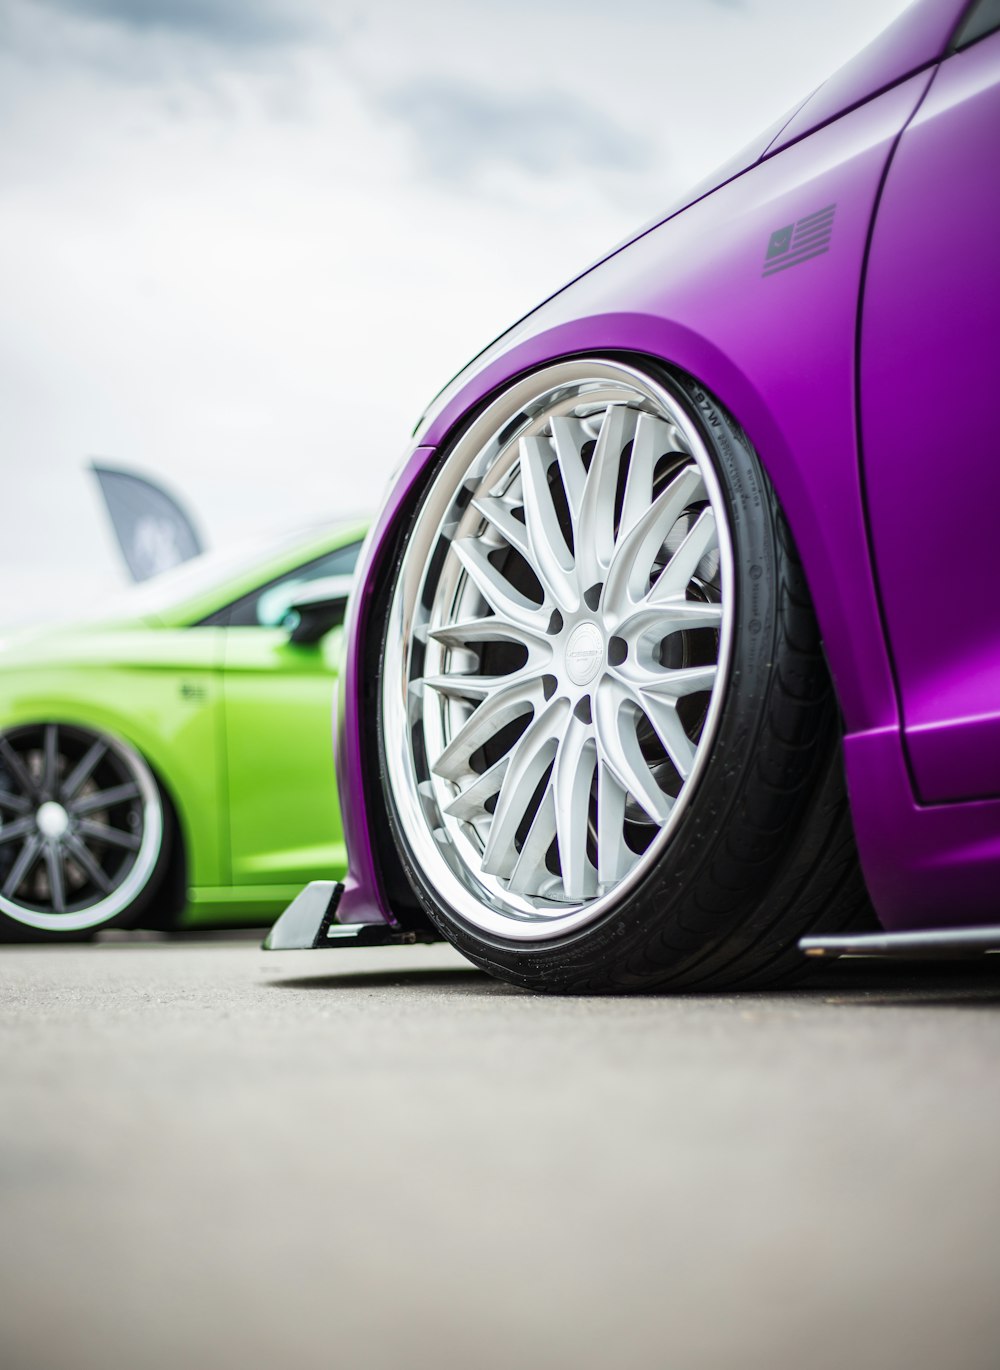 green and purple vehicles